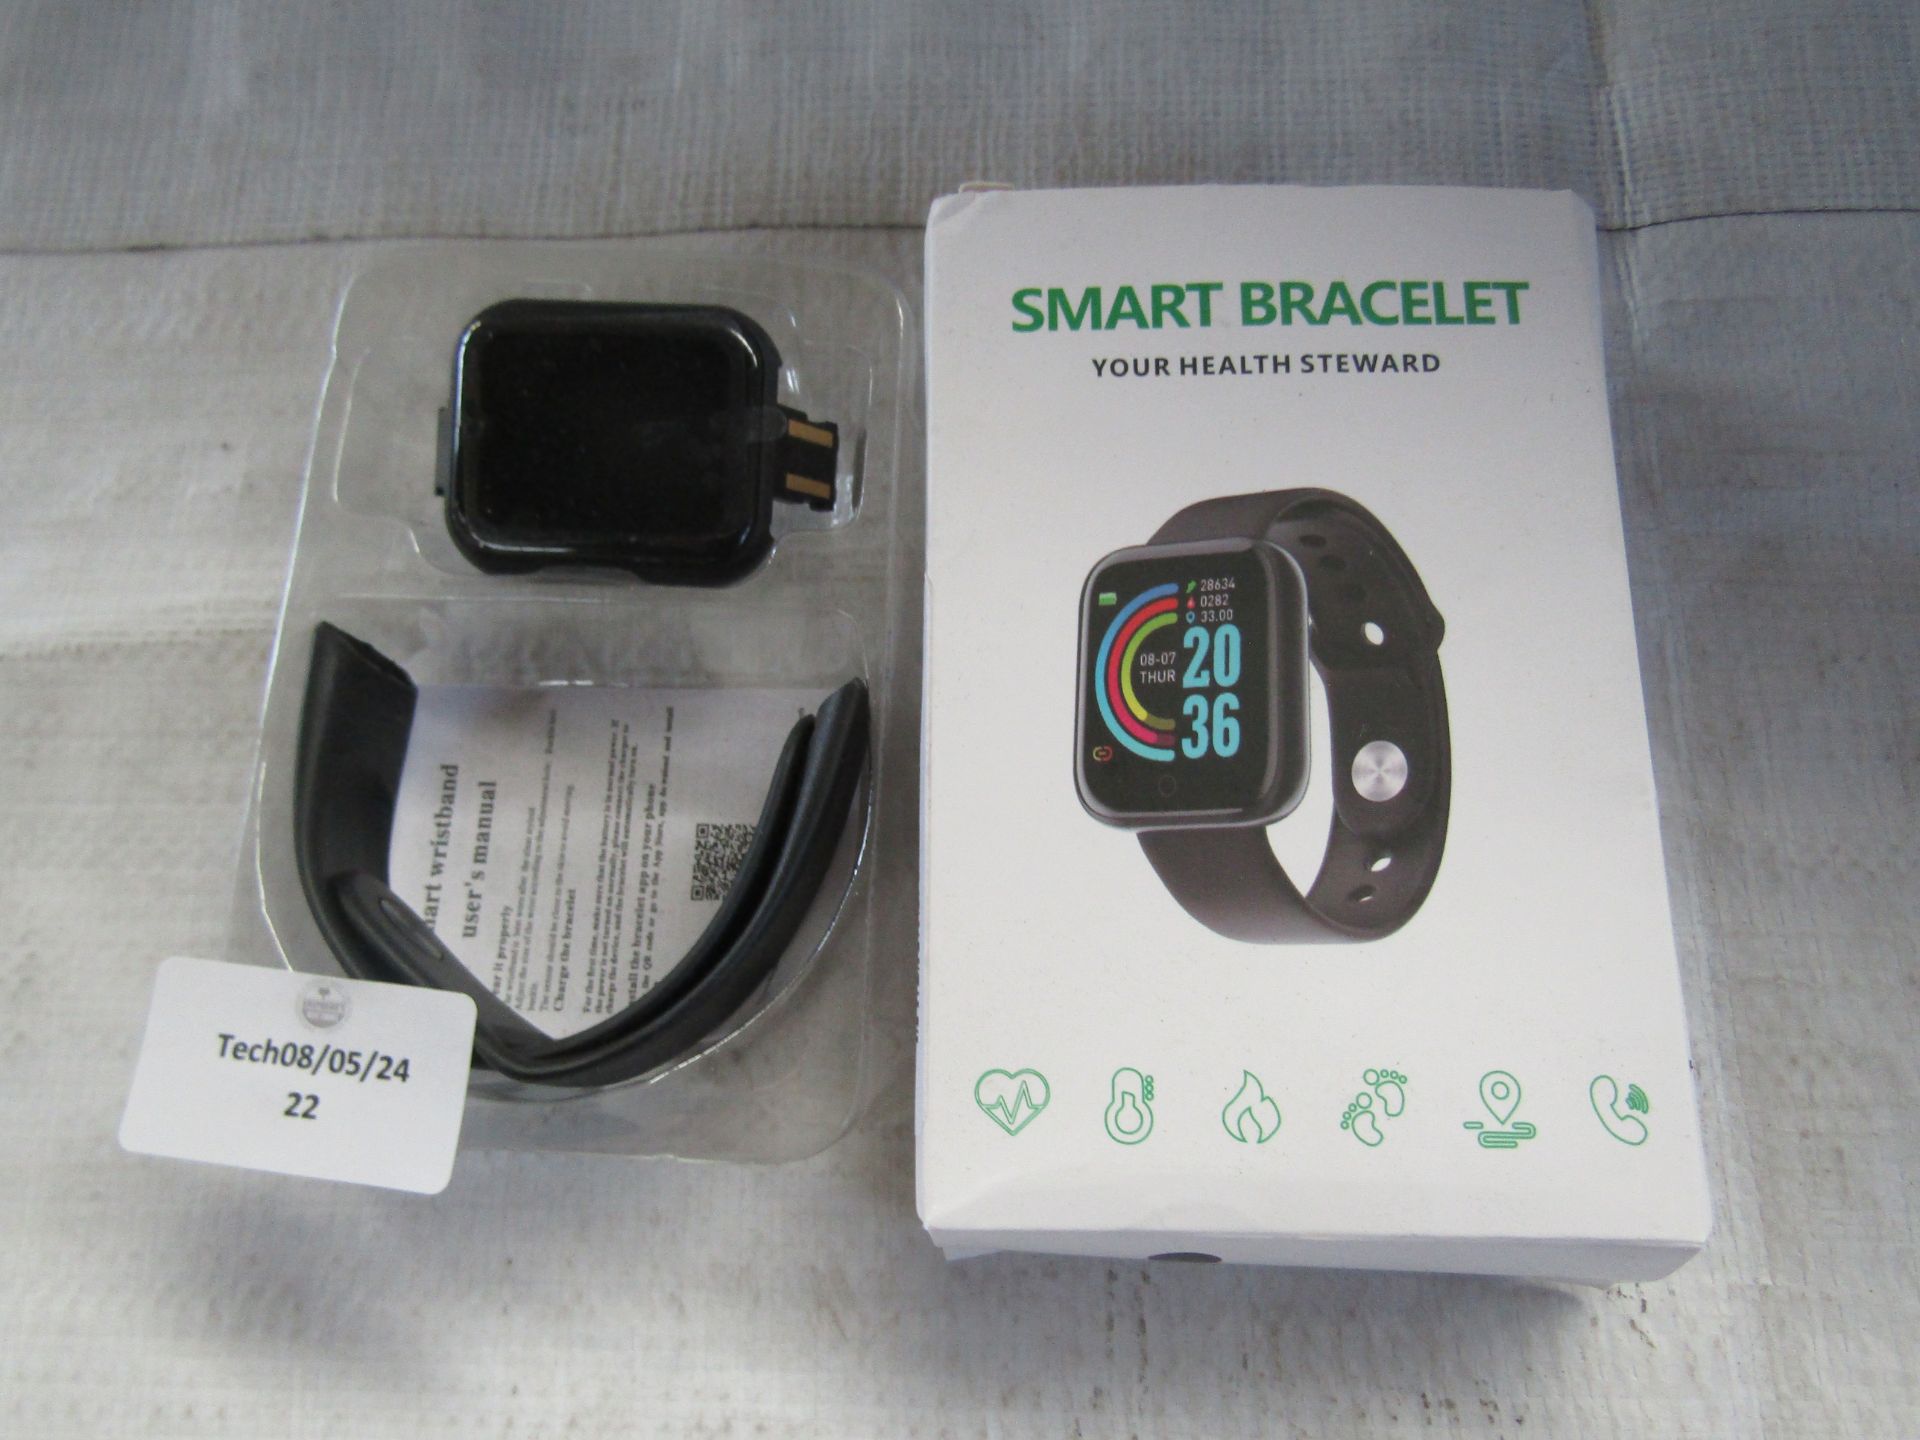 Your Health Steward Smart Wristband Bracelet, Black - Unchecked & Boxed.